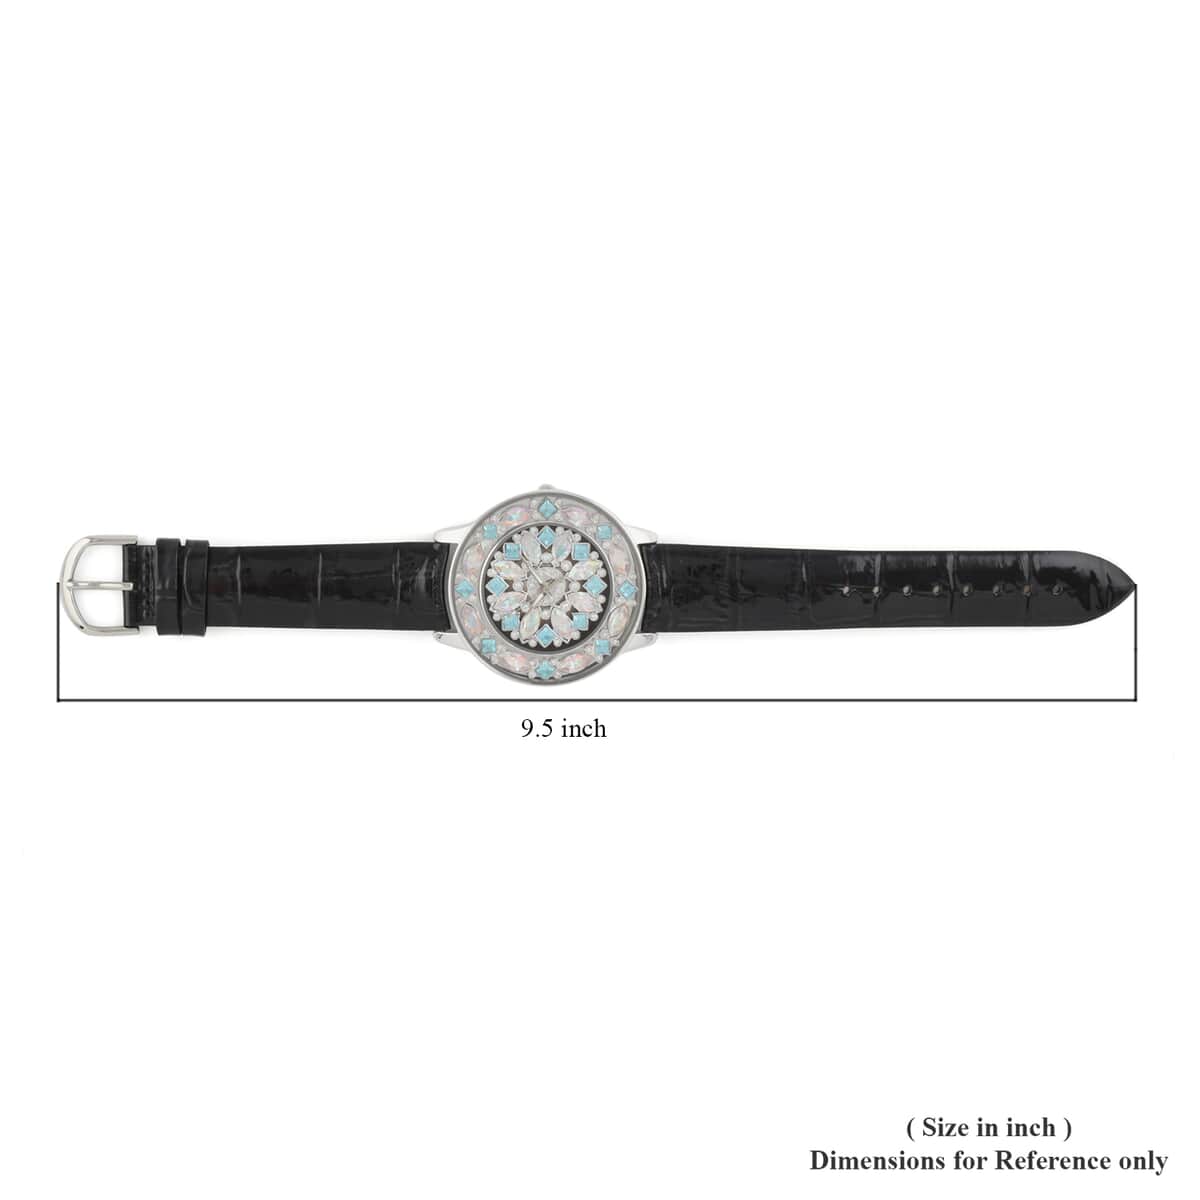 ADEE KAYE Lafayette Austrian Crystal Japanese Movement Watch with Genuine Leather Strap in Blue (45mm) image number 4